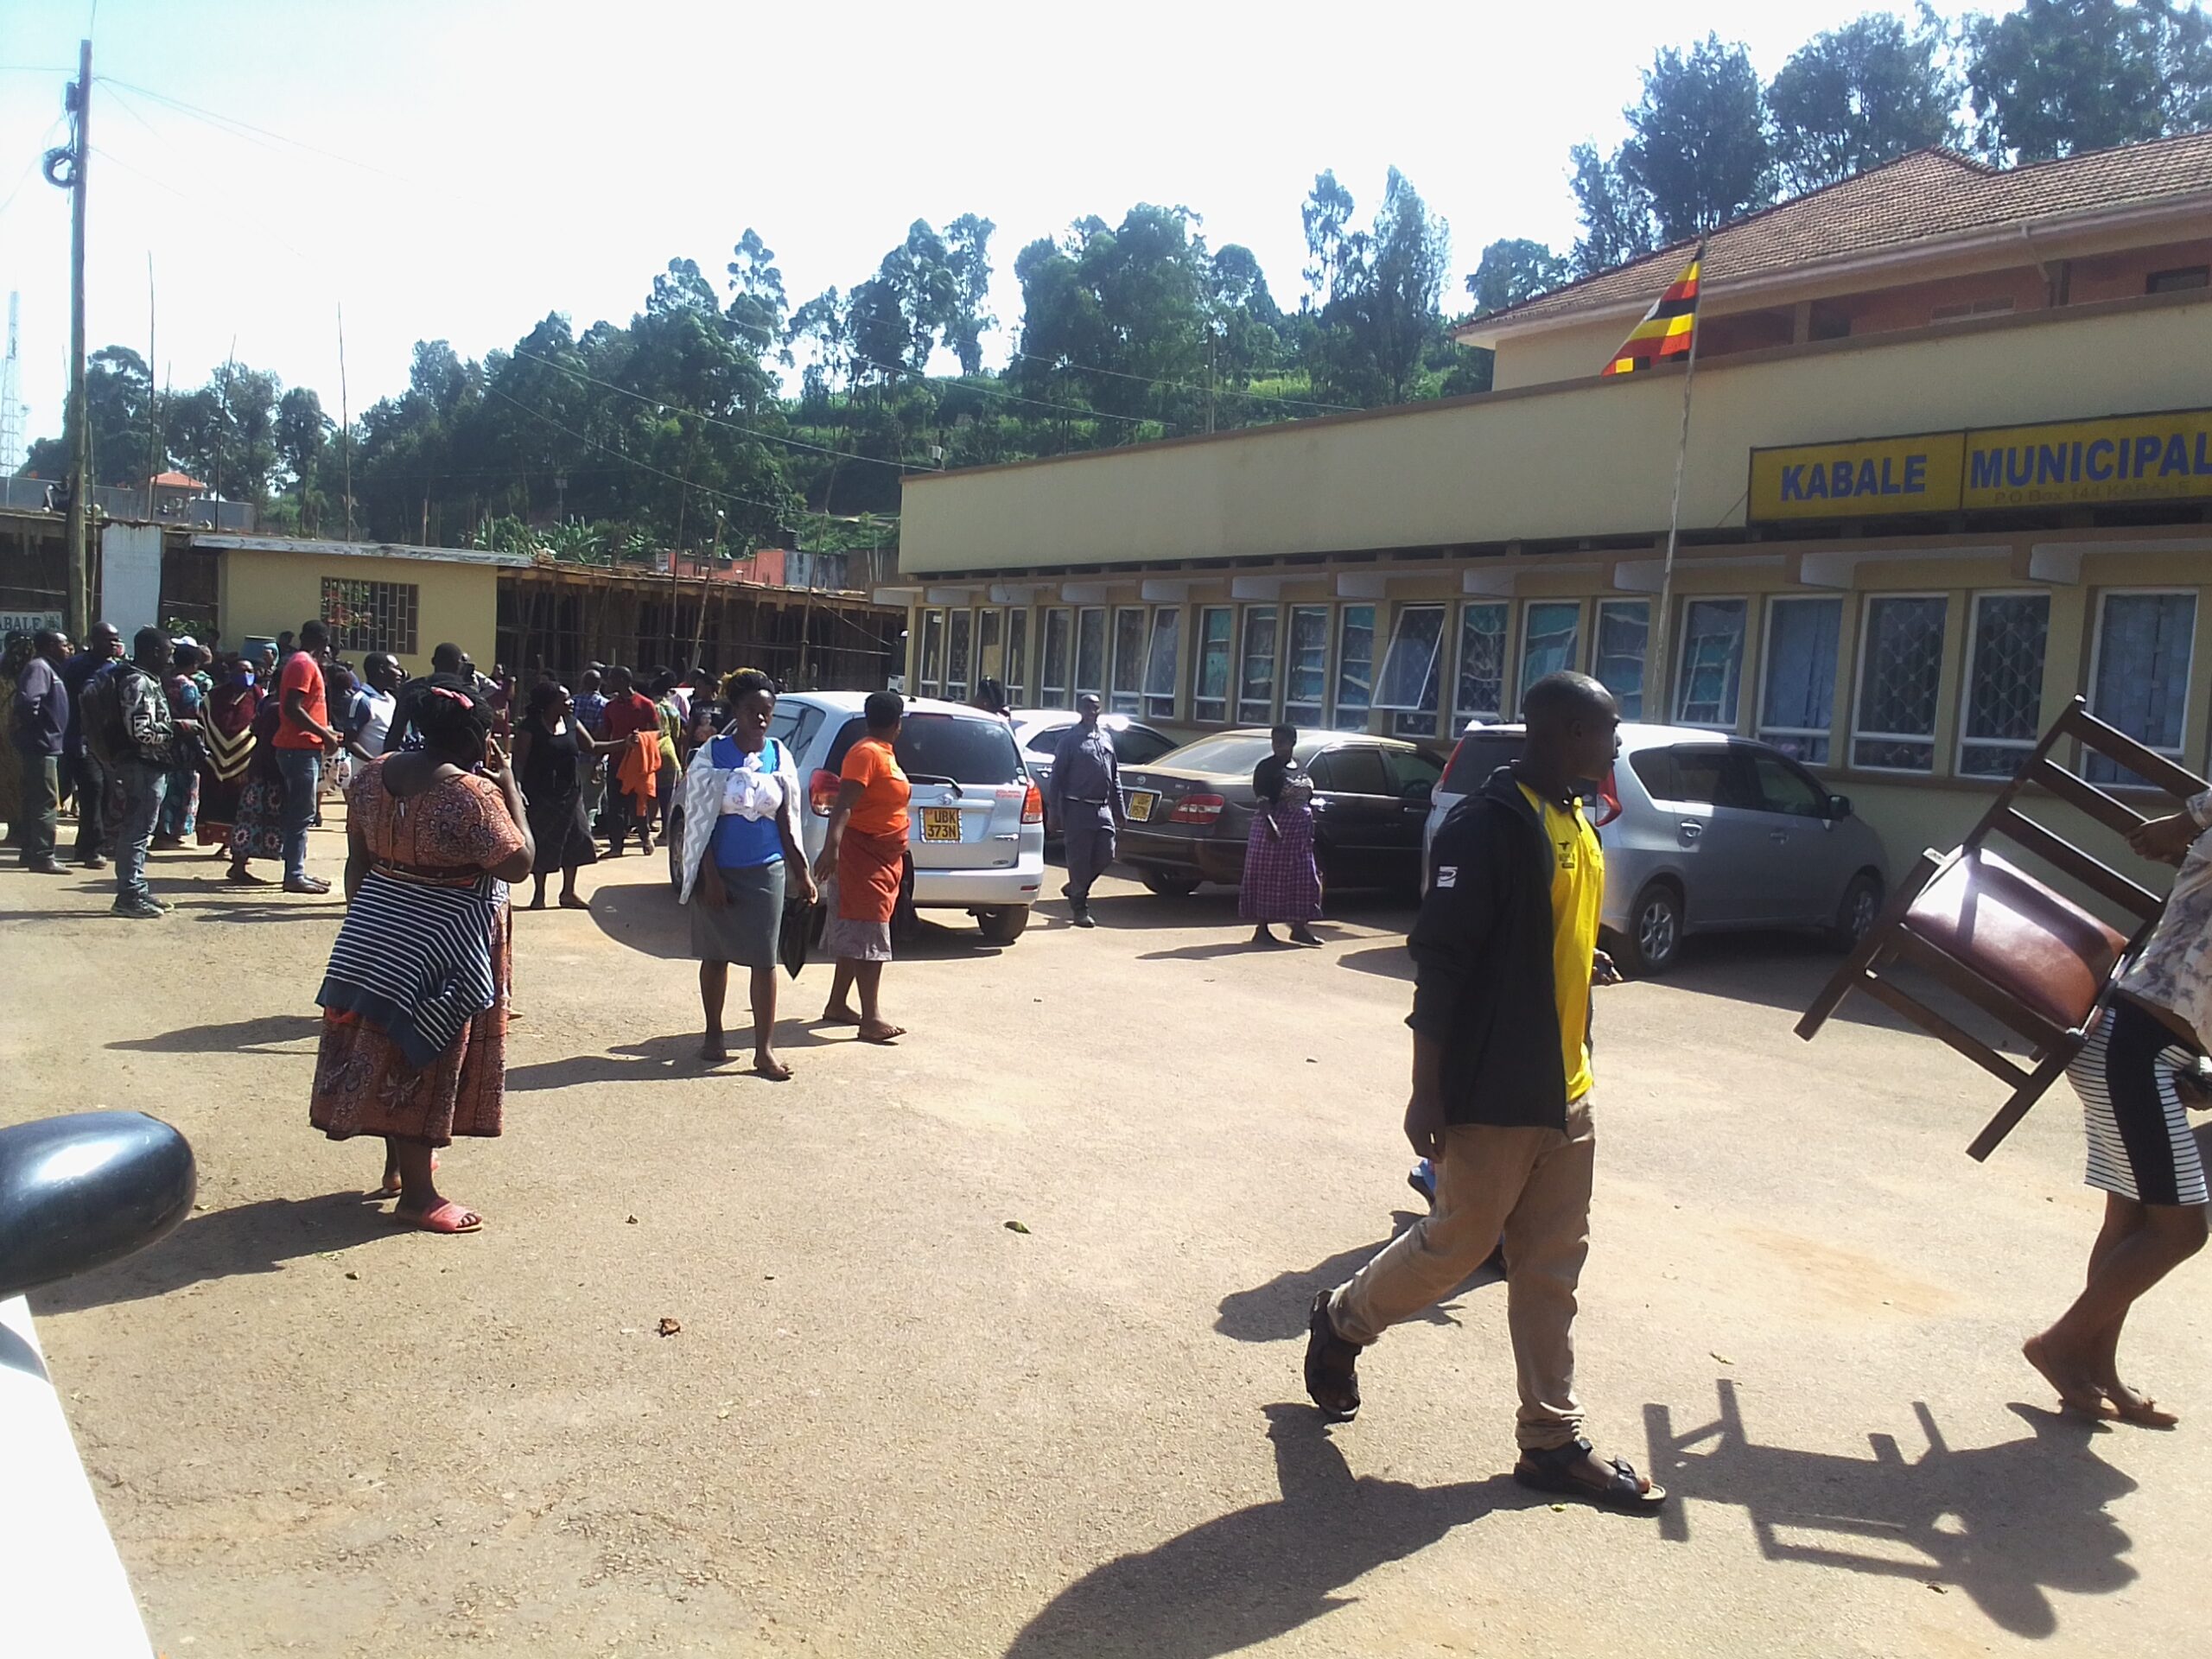 Market Closed For Operating Illegally in Kabale.